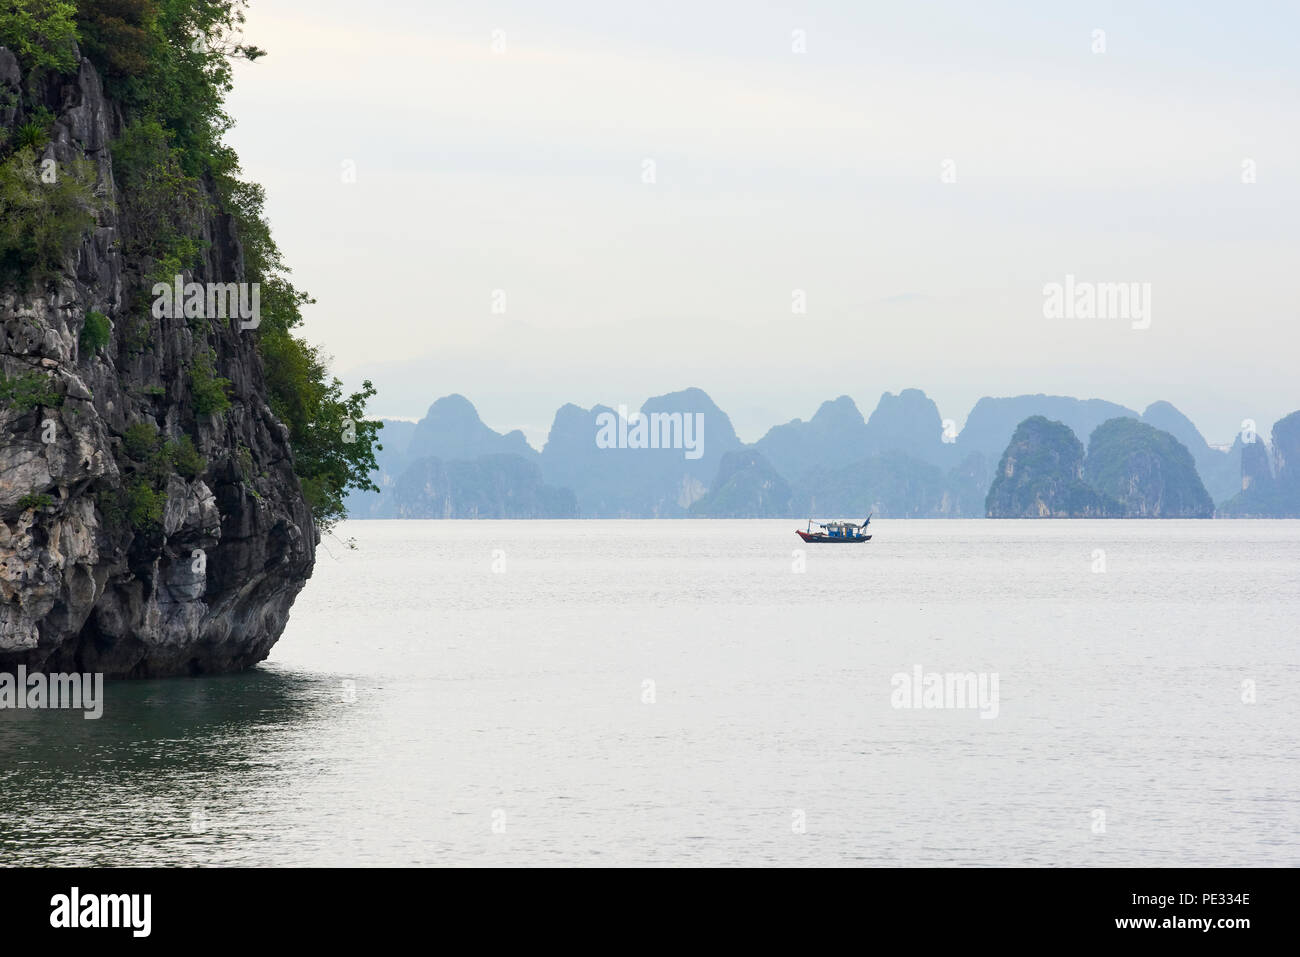 A small fishing boat in near silhouette at rest amongst range of islets in Halong Bay, North Vietnam, against misty blueish mountains in the backgroun Stock Photo